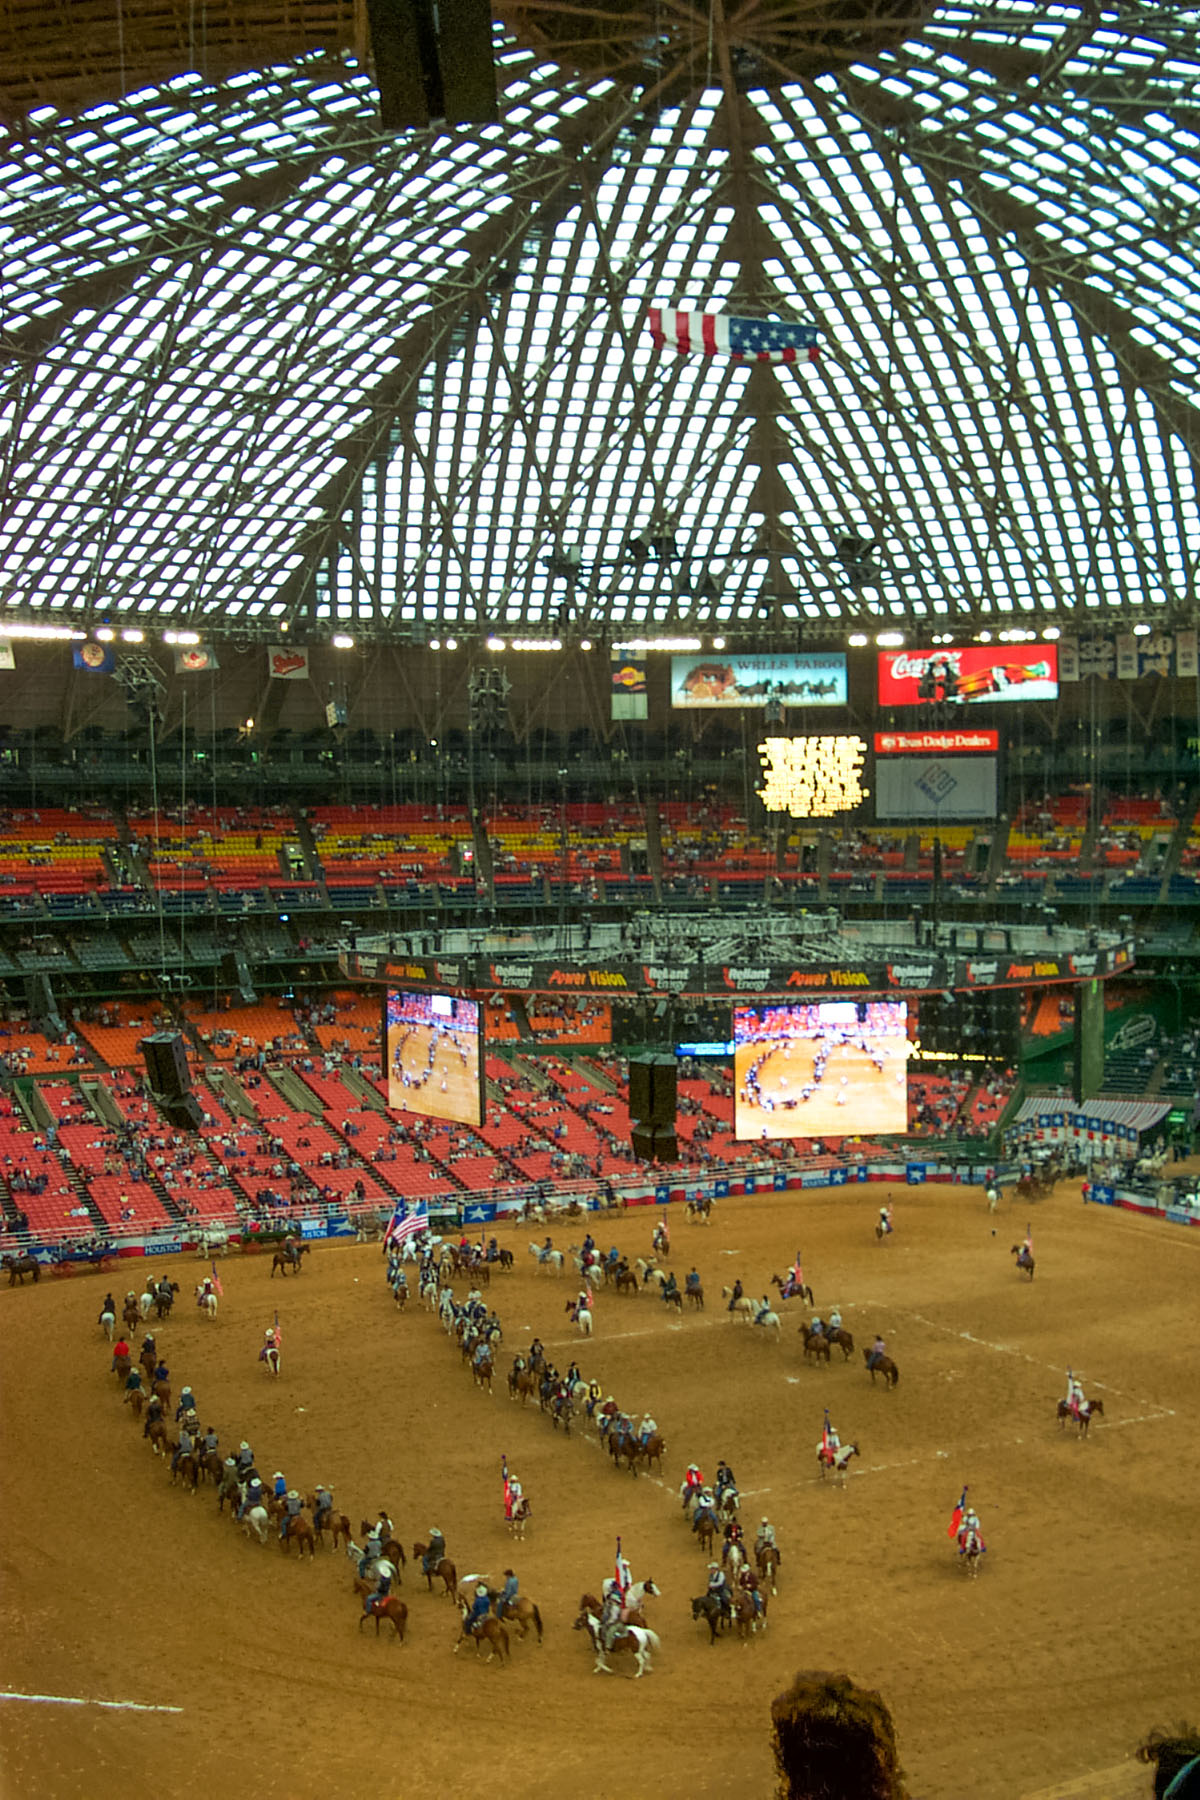 This image of the Houston Astrodome was taken during the Houston Livestock Show and Rodeo in 2000, but I did attend a baseball game there back in 1976.  The Astros moved to their new field in 2000, and the livestock show moved to the new football stadium in 2002.  Although there have been some redevelopment plans, the historic structure sits empty and unusable as of 2024.  Click for next photo.